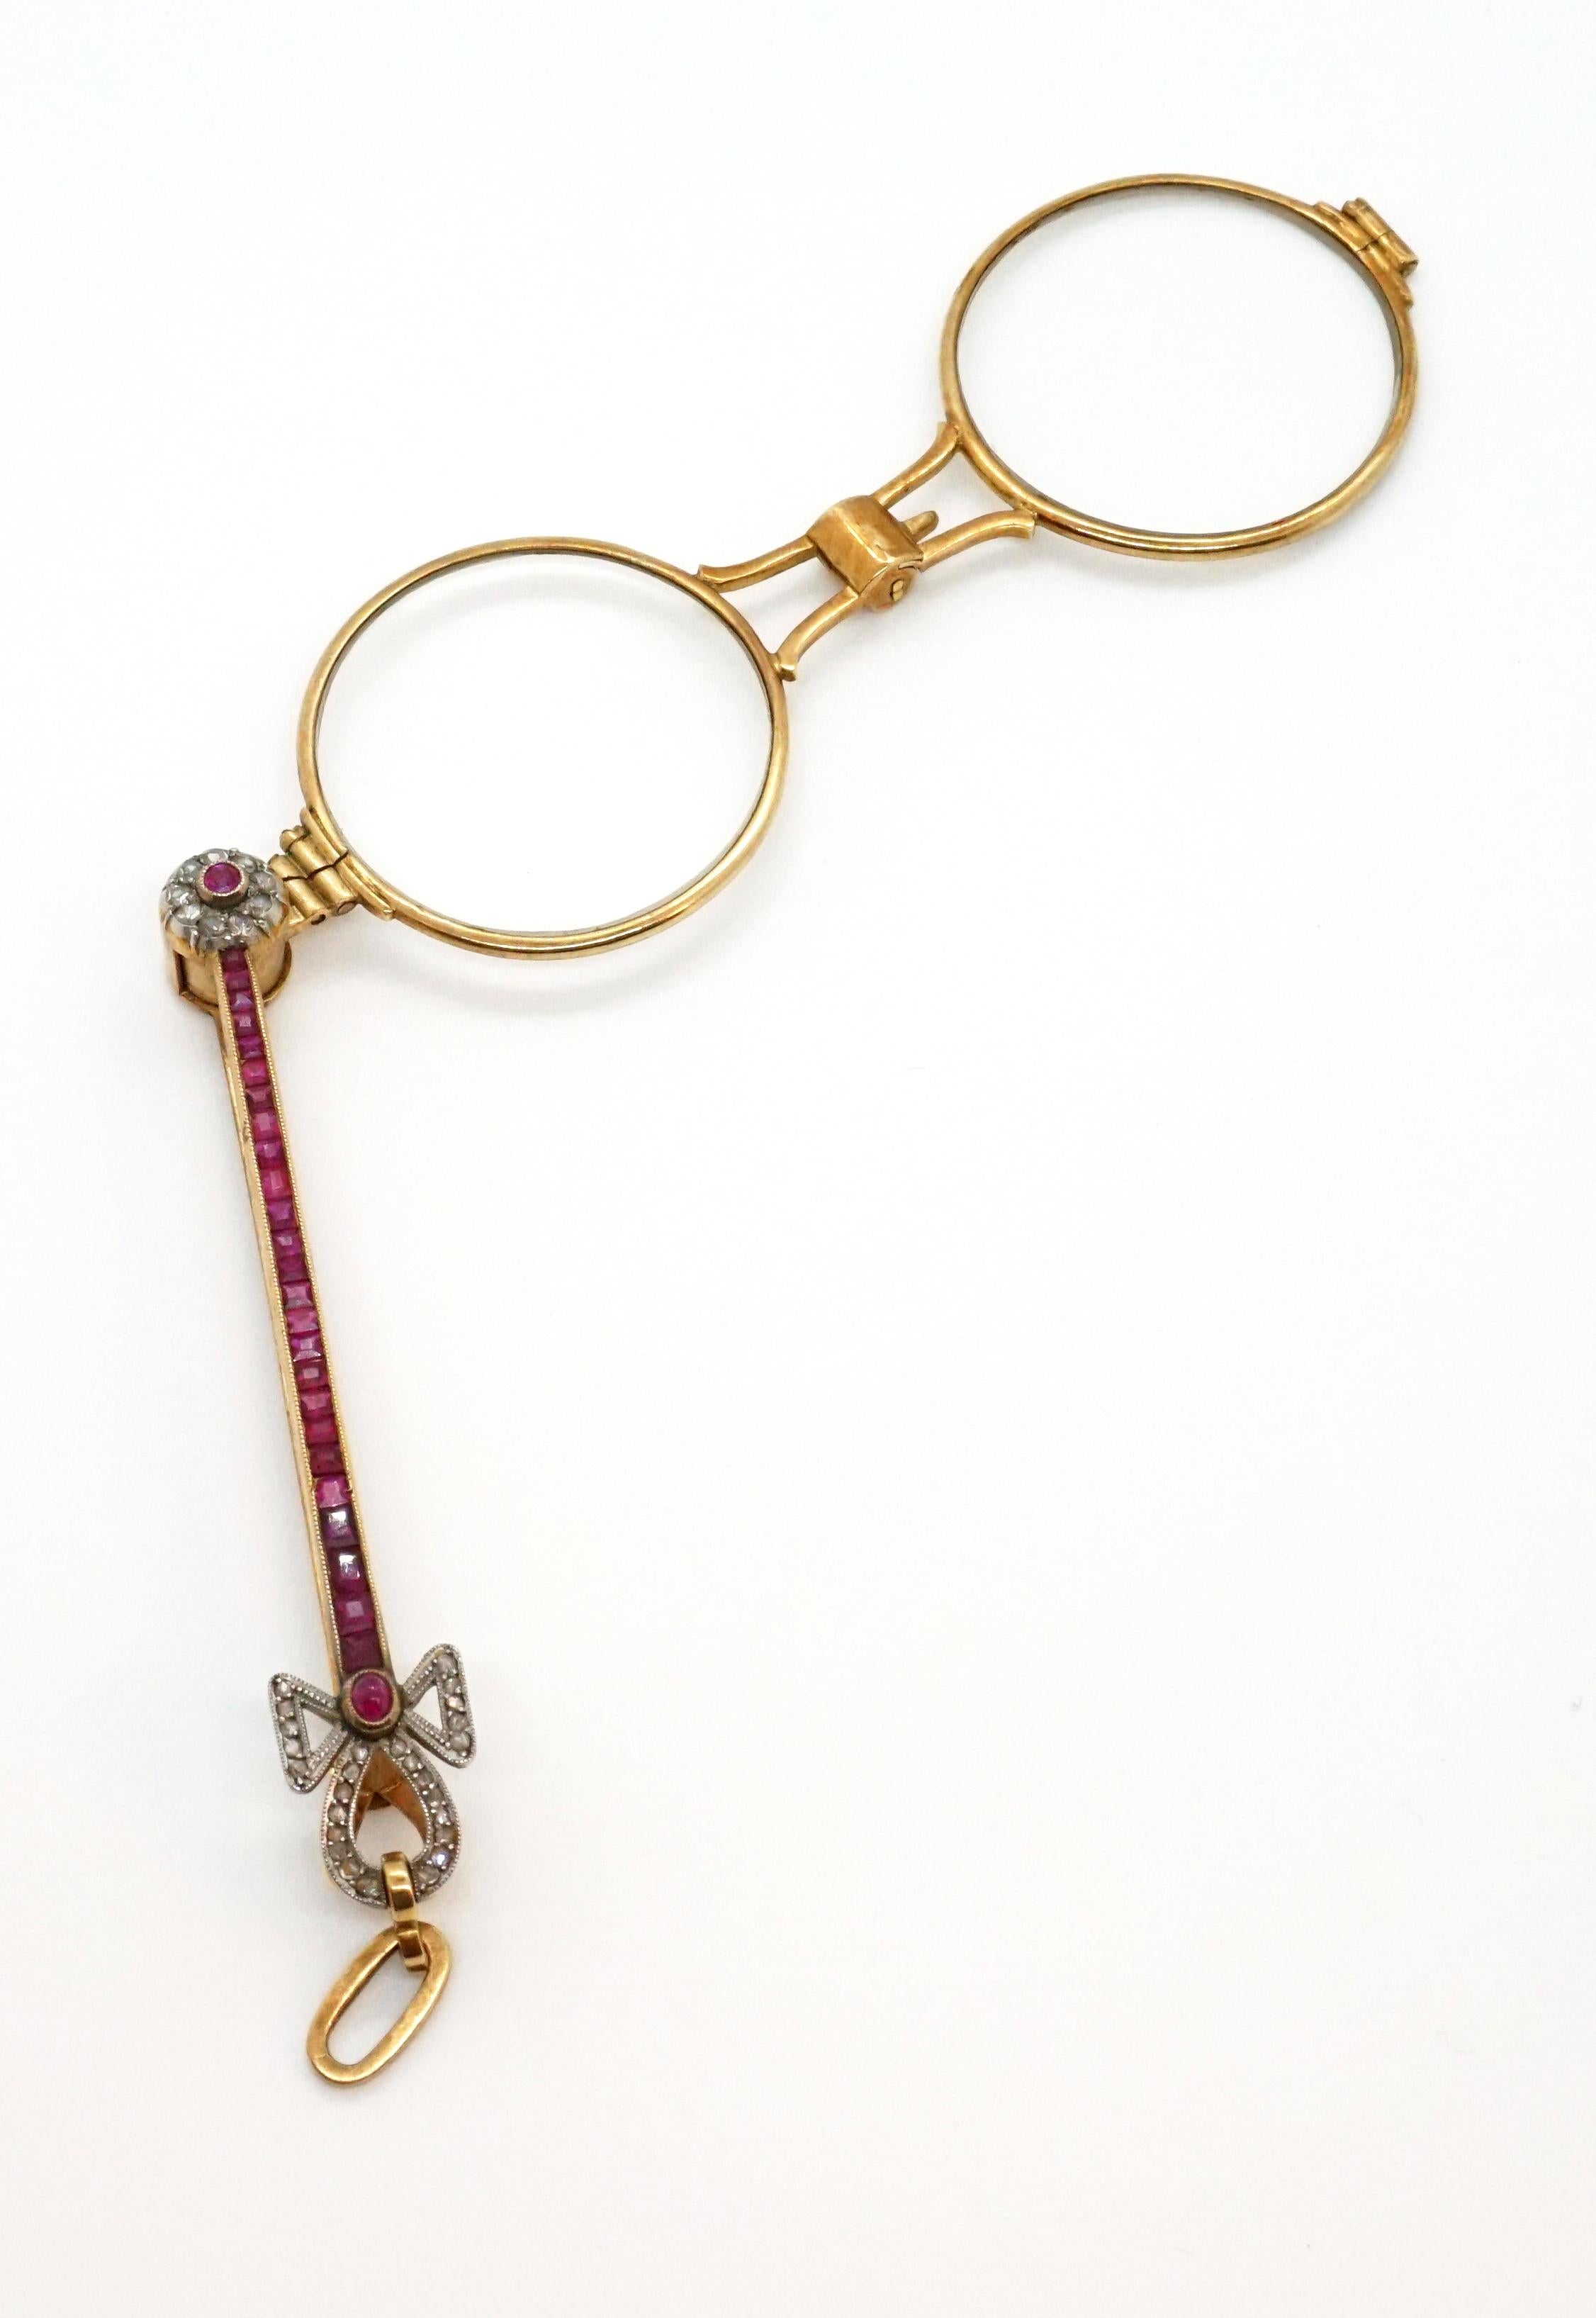 Elegant Antique Lady's Lorgnette 14k/585 Gold With Red Ruby Stones. The foldable frame can be turned into the handle which is equipped with sqare ruby stones. The ends of the handle, of which one is shaped as a ribbon, are set with numerous old cut